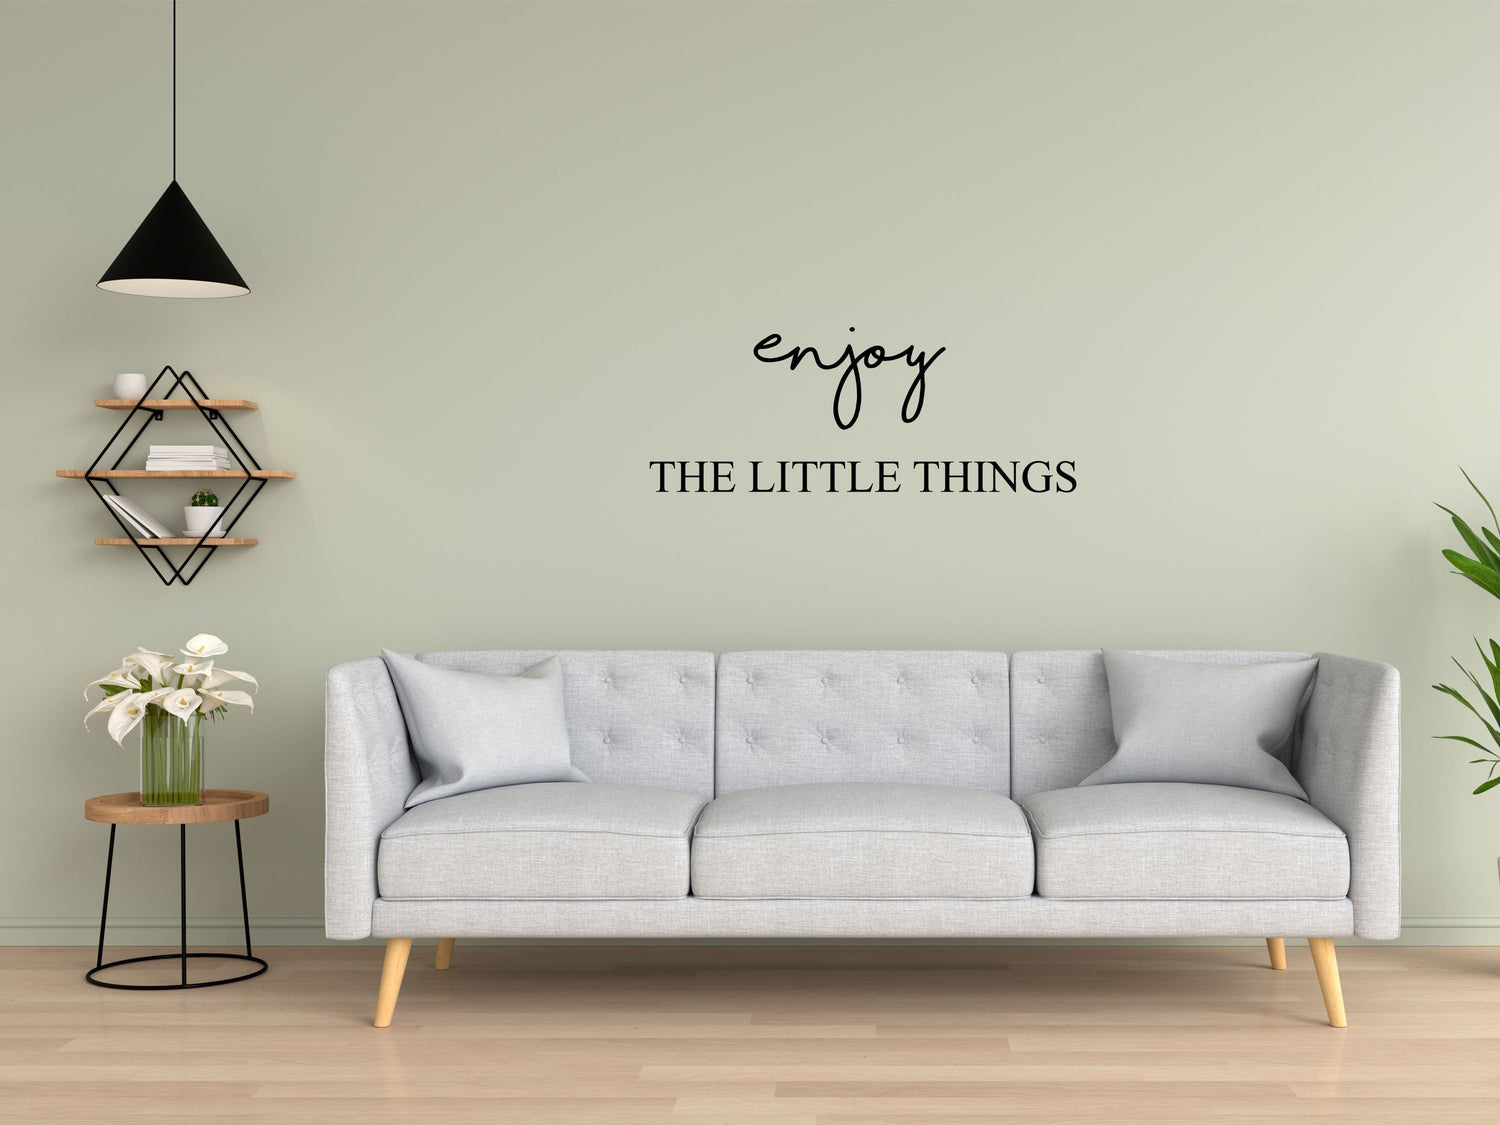 Enjoy The Little Things - Inspirational Wall Decals Vinyl Wall Decal Inspirational Wall Signs 